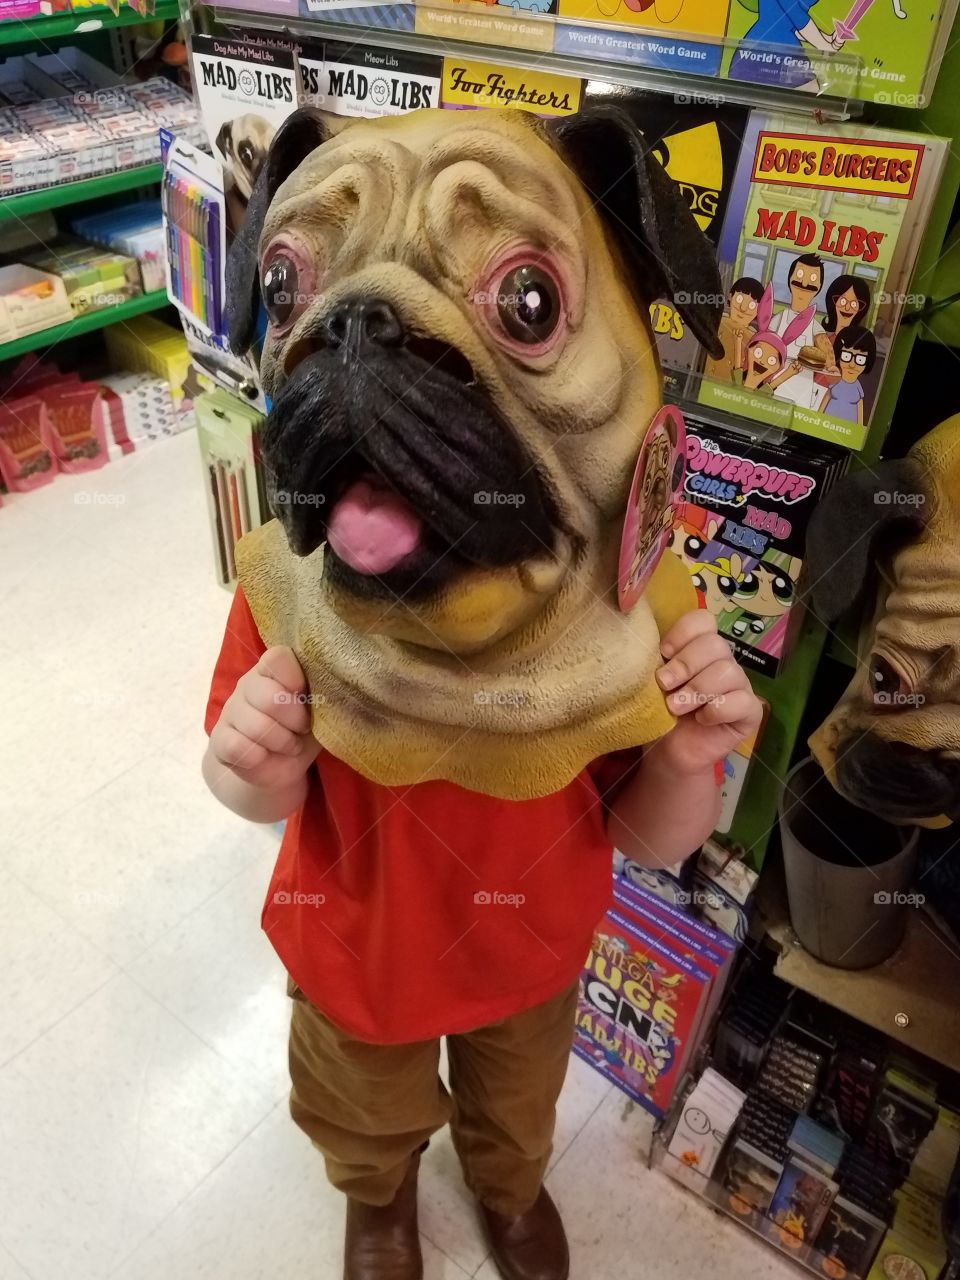 Little boy, in novelty store, displays a pug mask on his head.